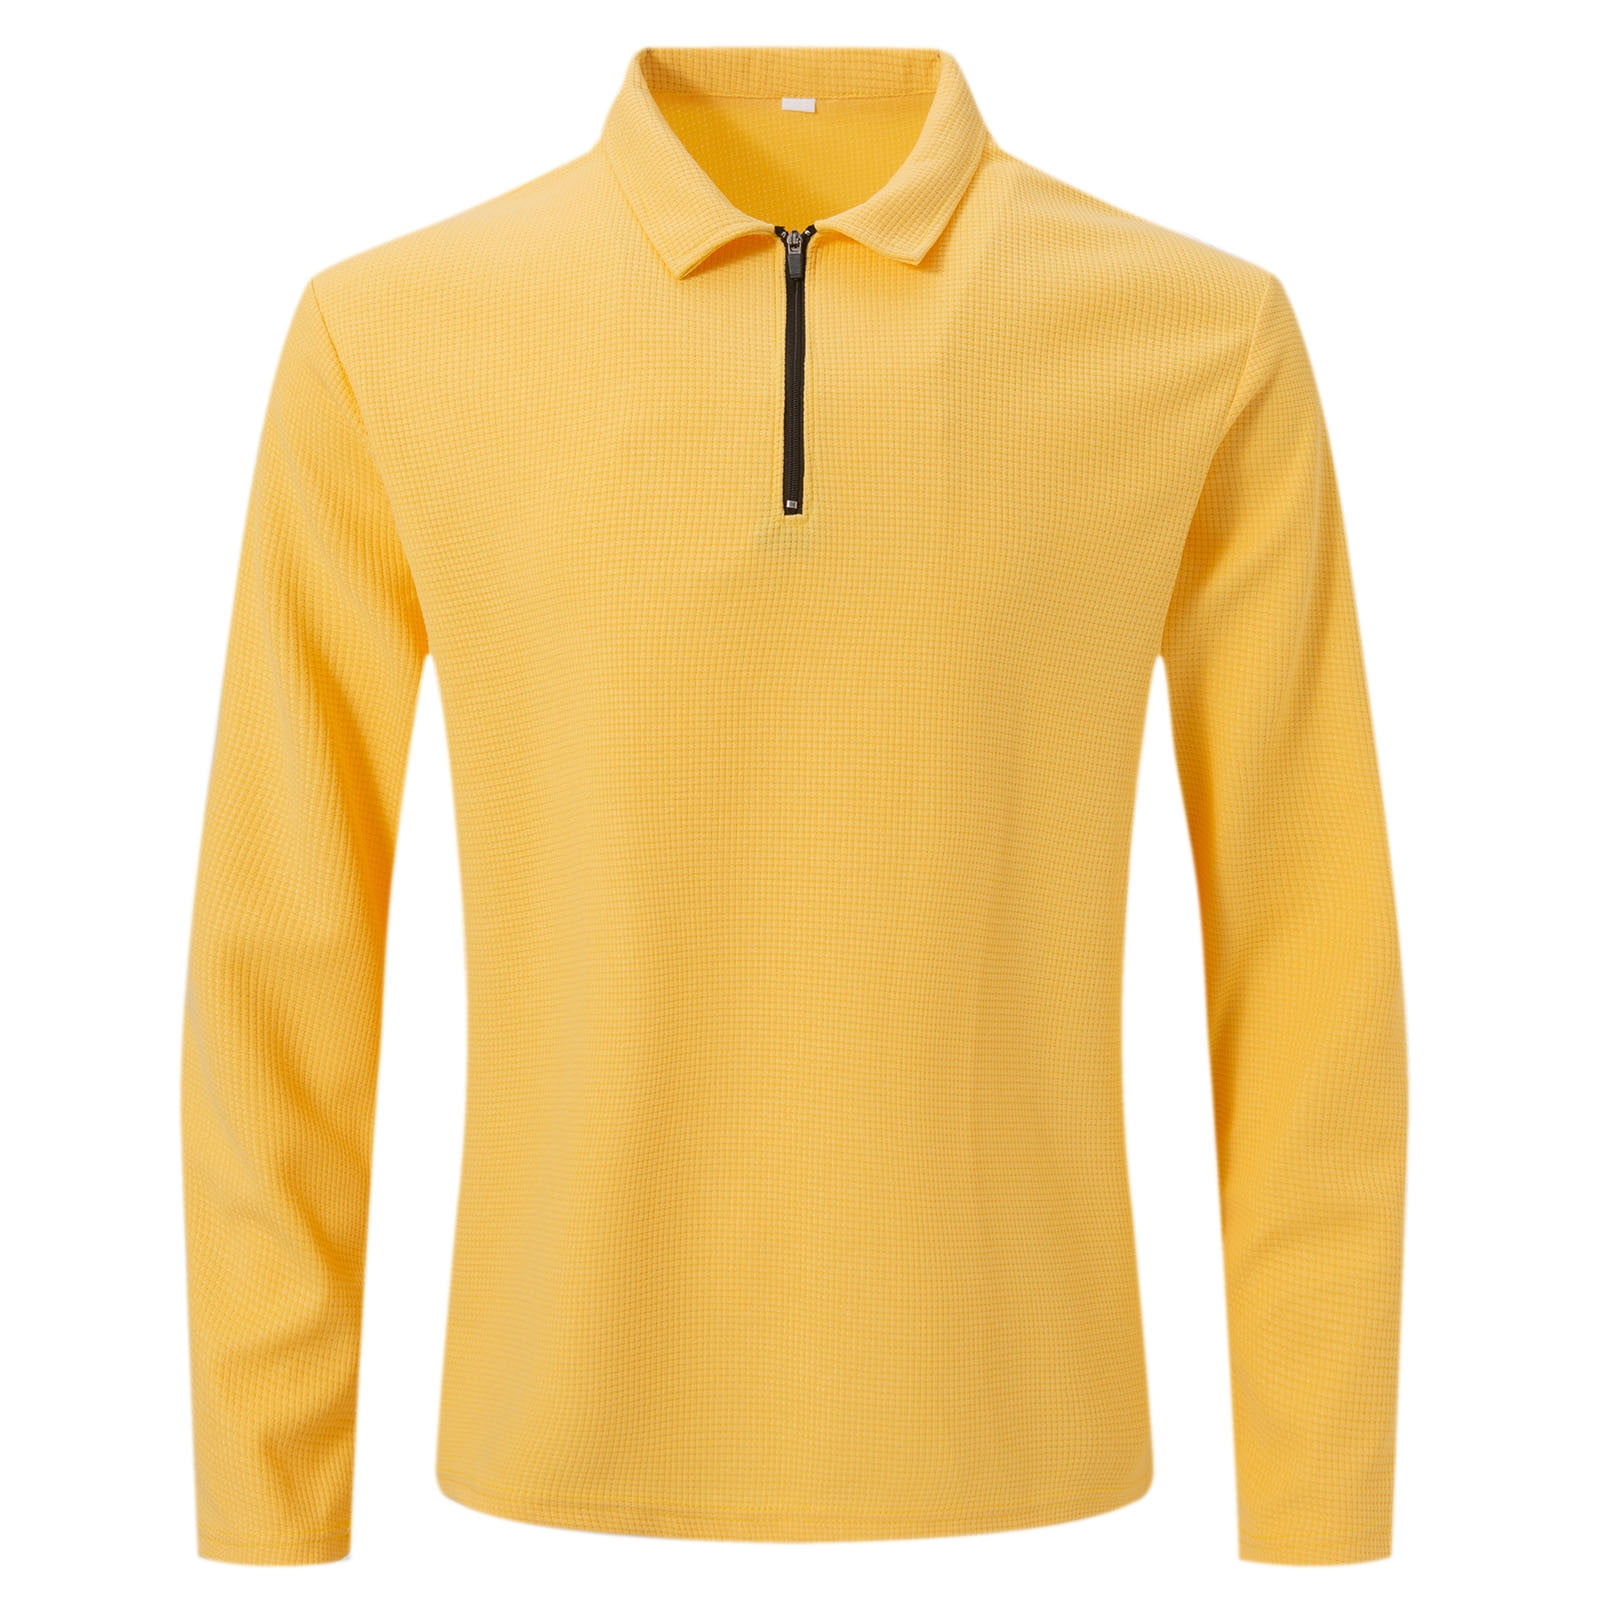 APEXFWDT Men's Pique Golf Shirts Long Sleeve 1/4 Zip Up Casual Collared ...